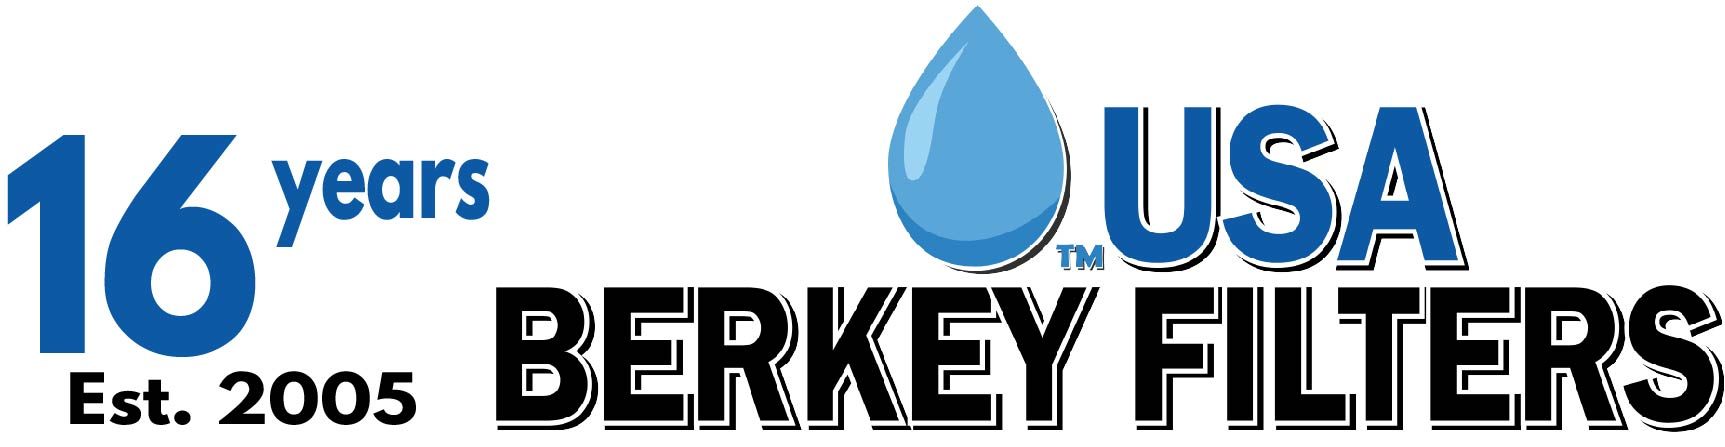 Royal Berkey Water filtration System - TANKS ONLY! NO FILTRATION ELEMENTS -  Helia Beer Co